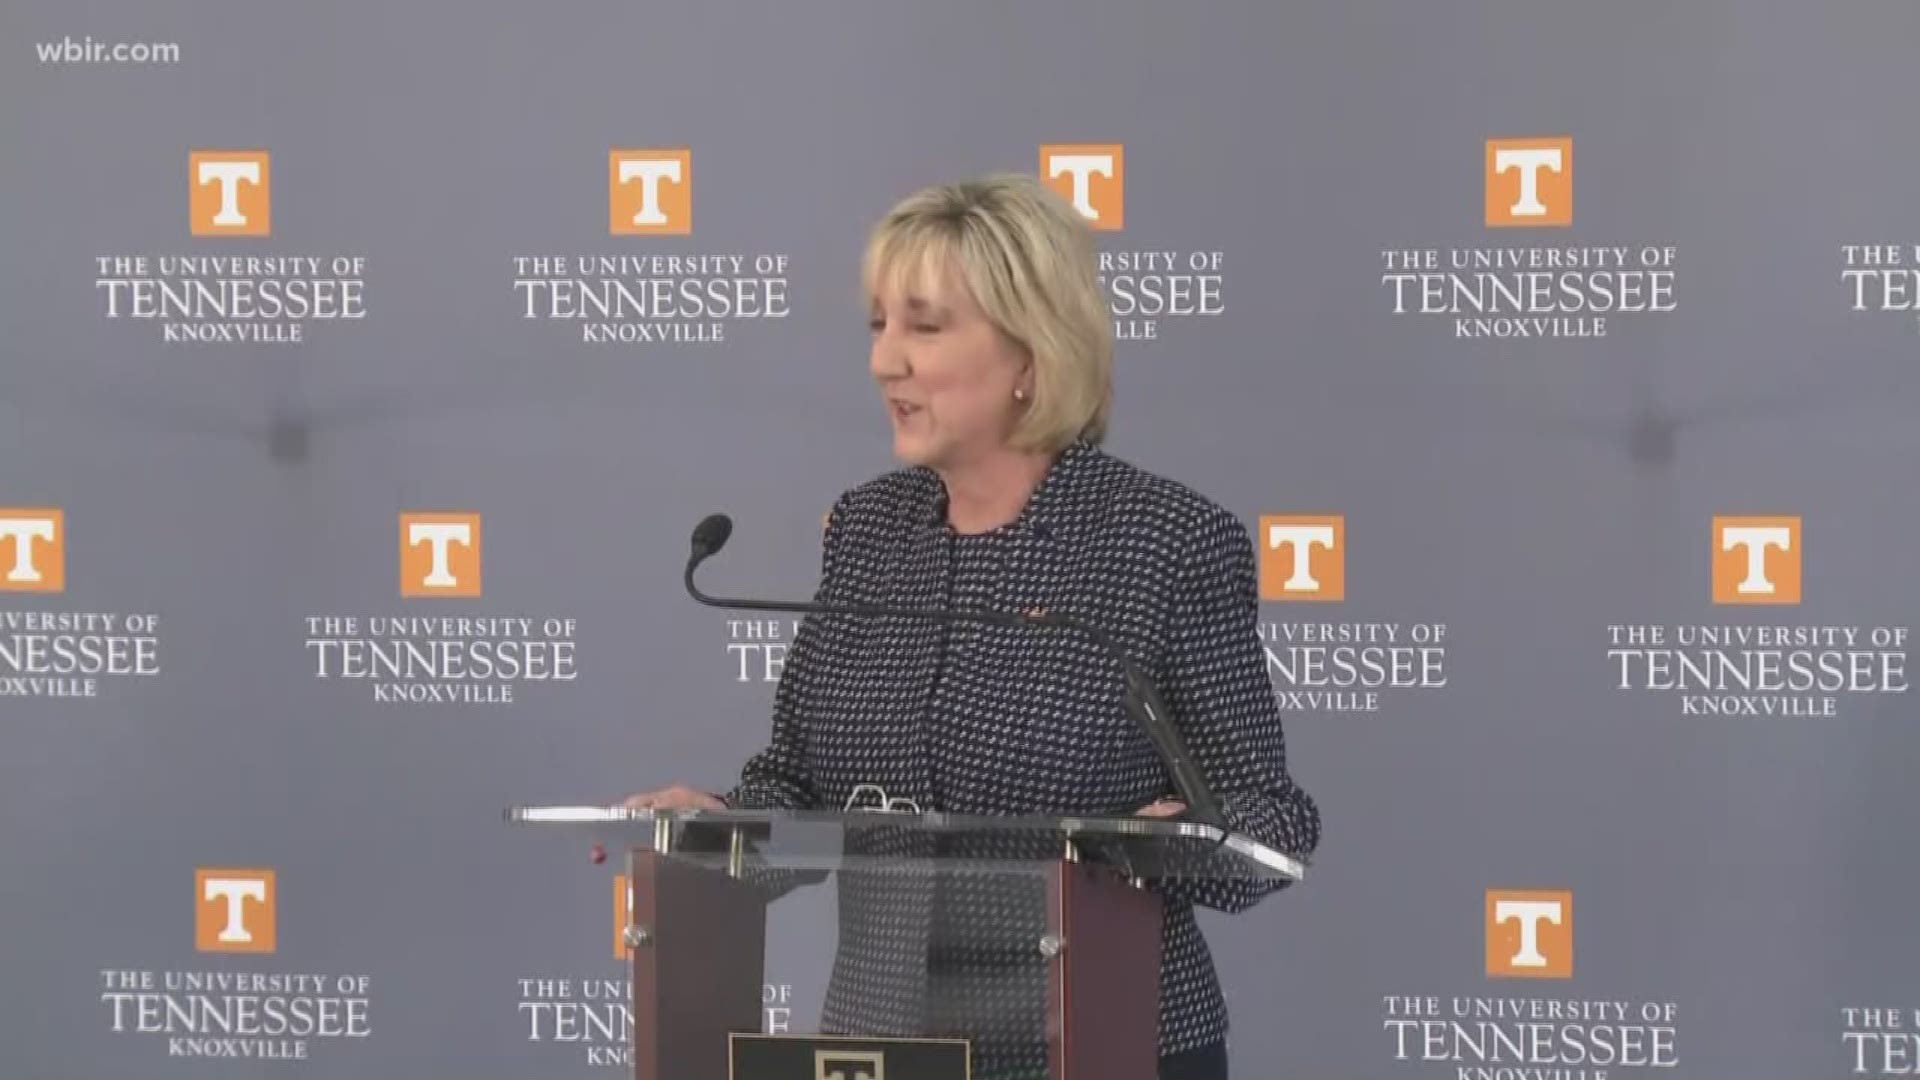 We heard from UT's next chancellor for the first time Monday afternoon. Donde Plowman officially takes over the job on July 1. Dr. Plowman says when she gets to campus she first wants to get input and go on a campus listening tour.